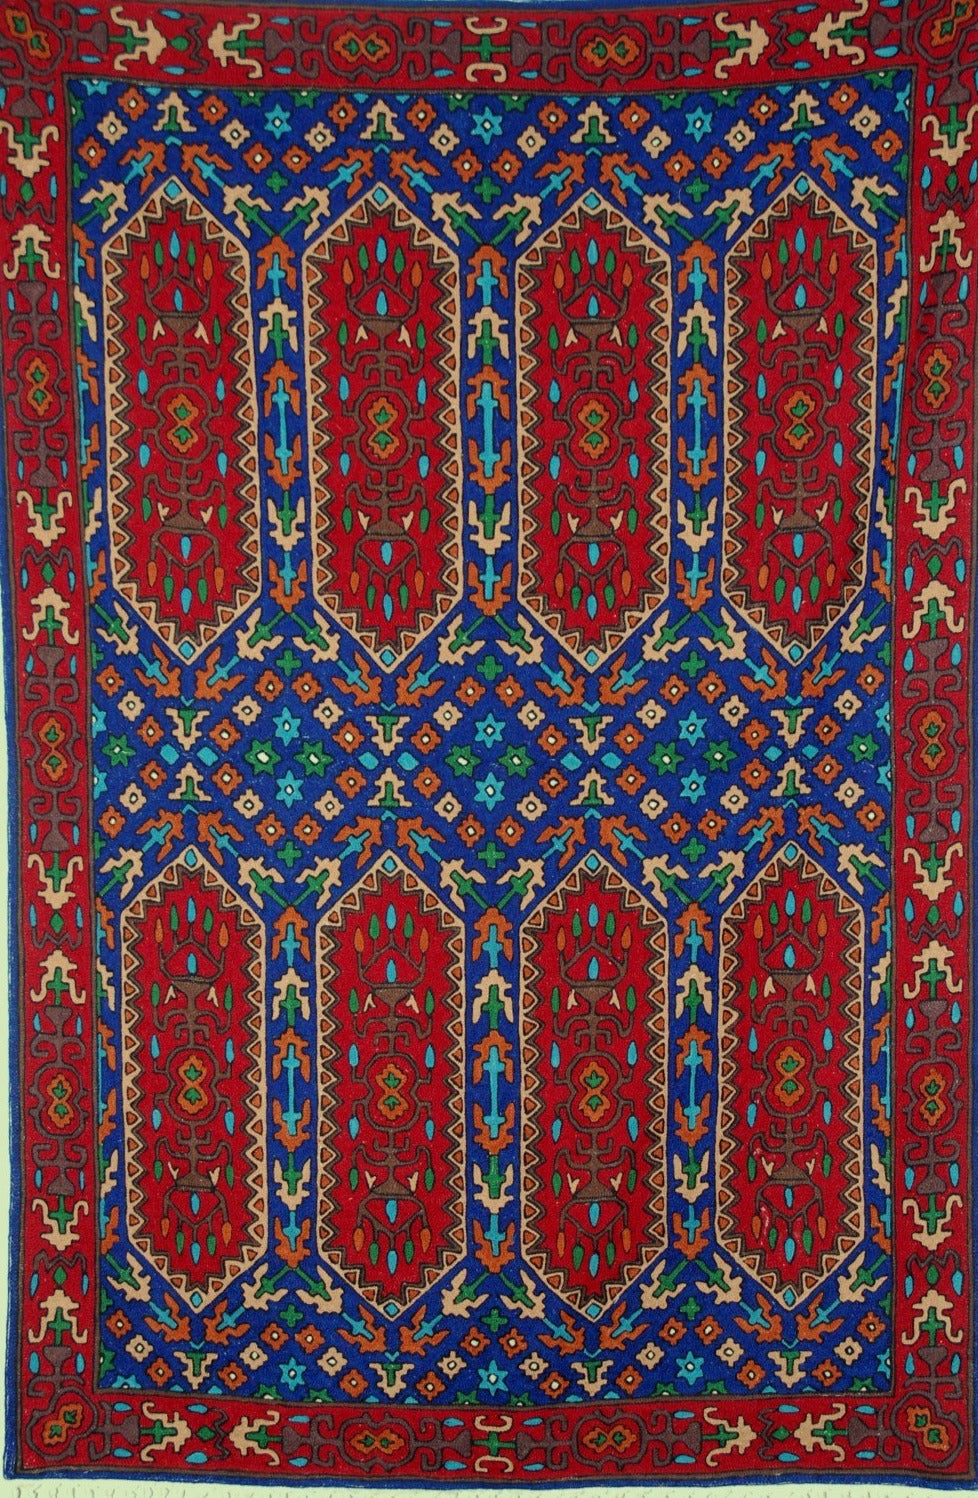 ChainStitch Tapestry Woolen Kilim Area Rug, Multicolor Embroidery 6x4 feet #CWR24112